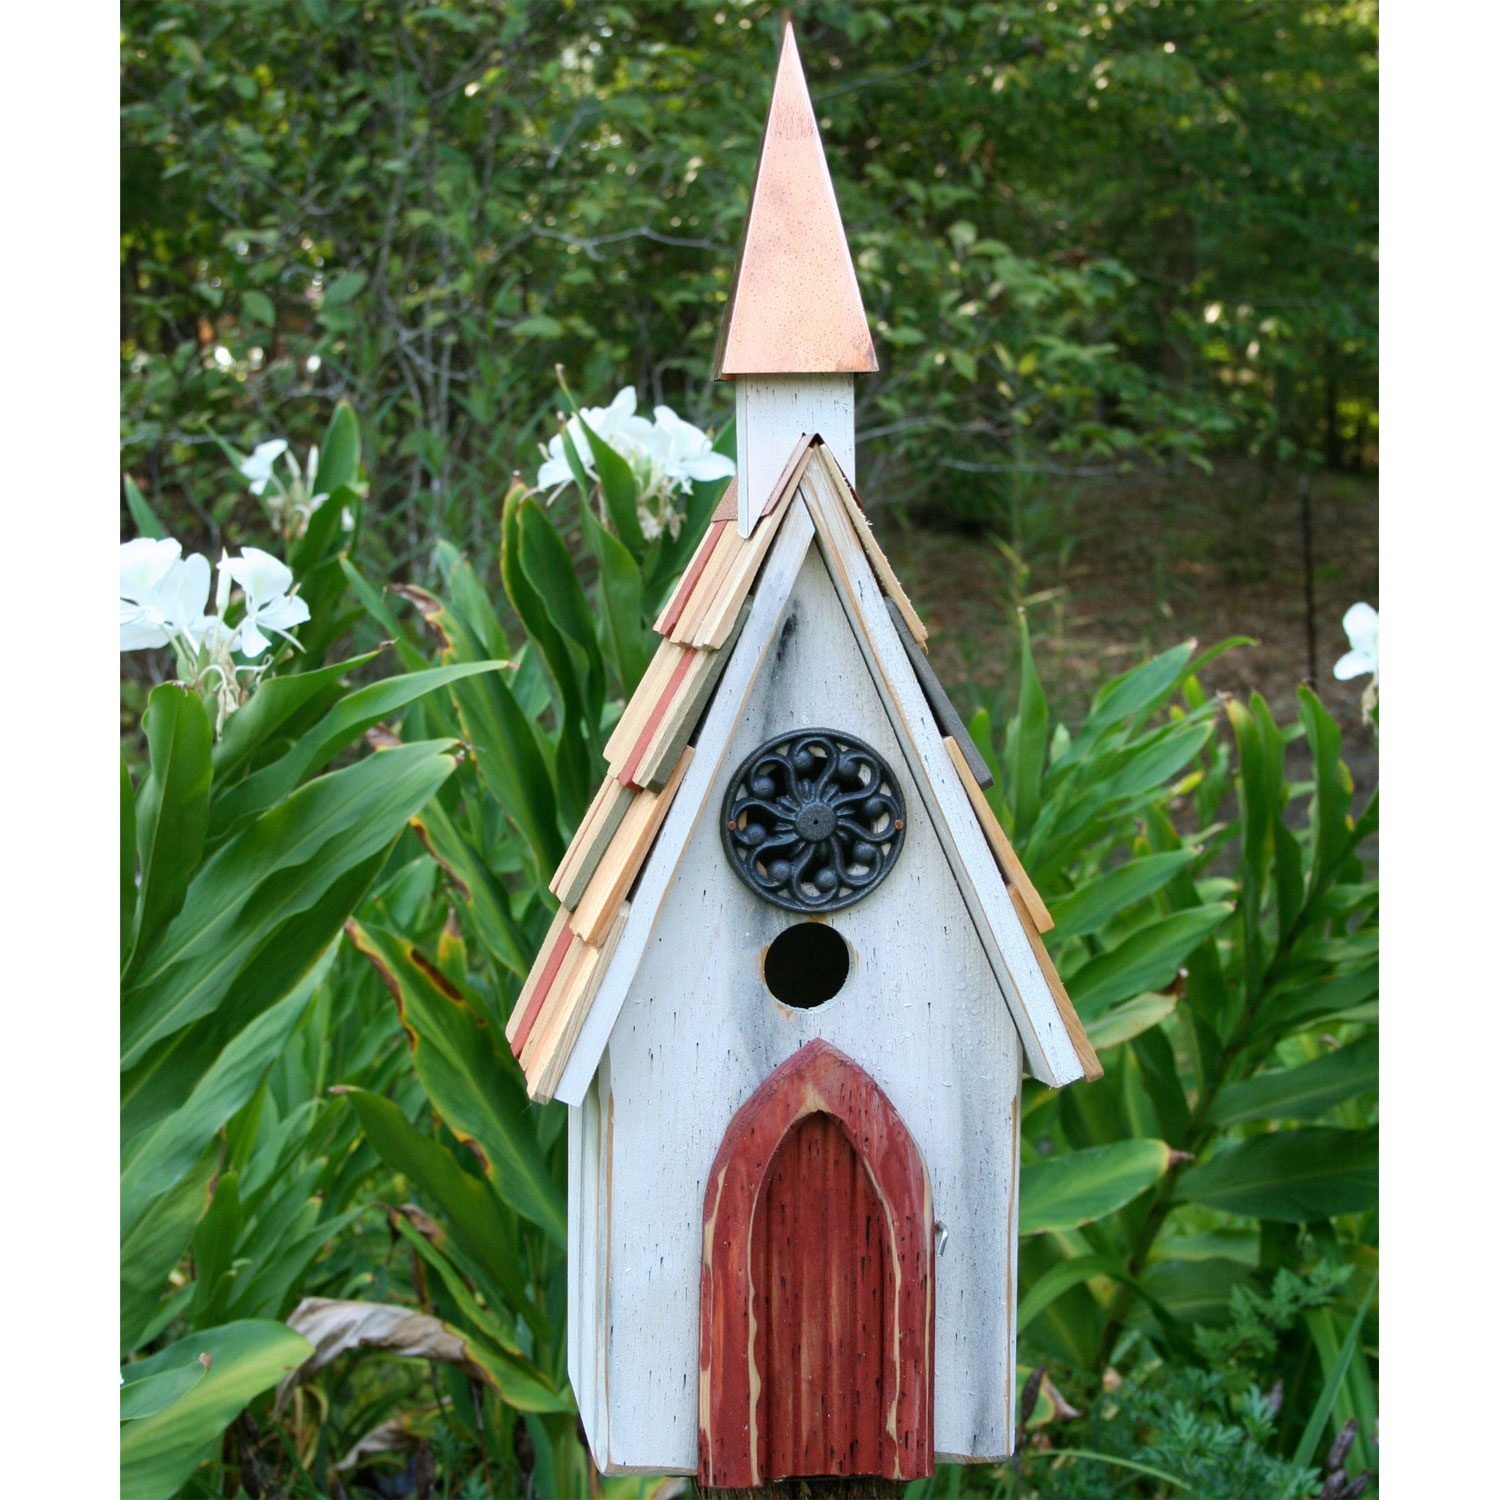 Recycled Bird Houses - House Design And Decorating Ideas